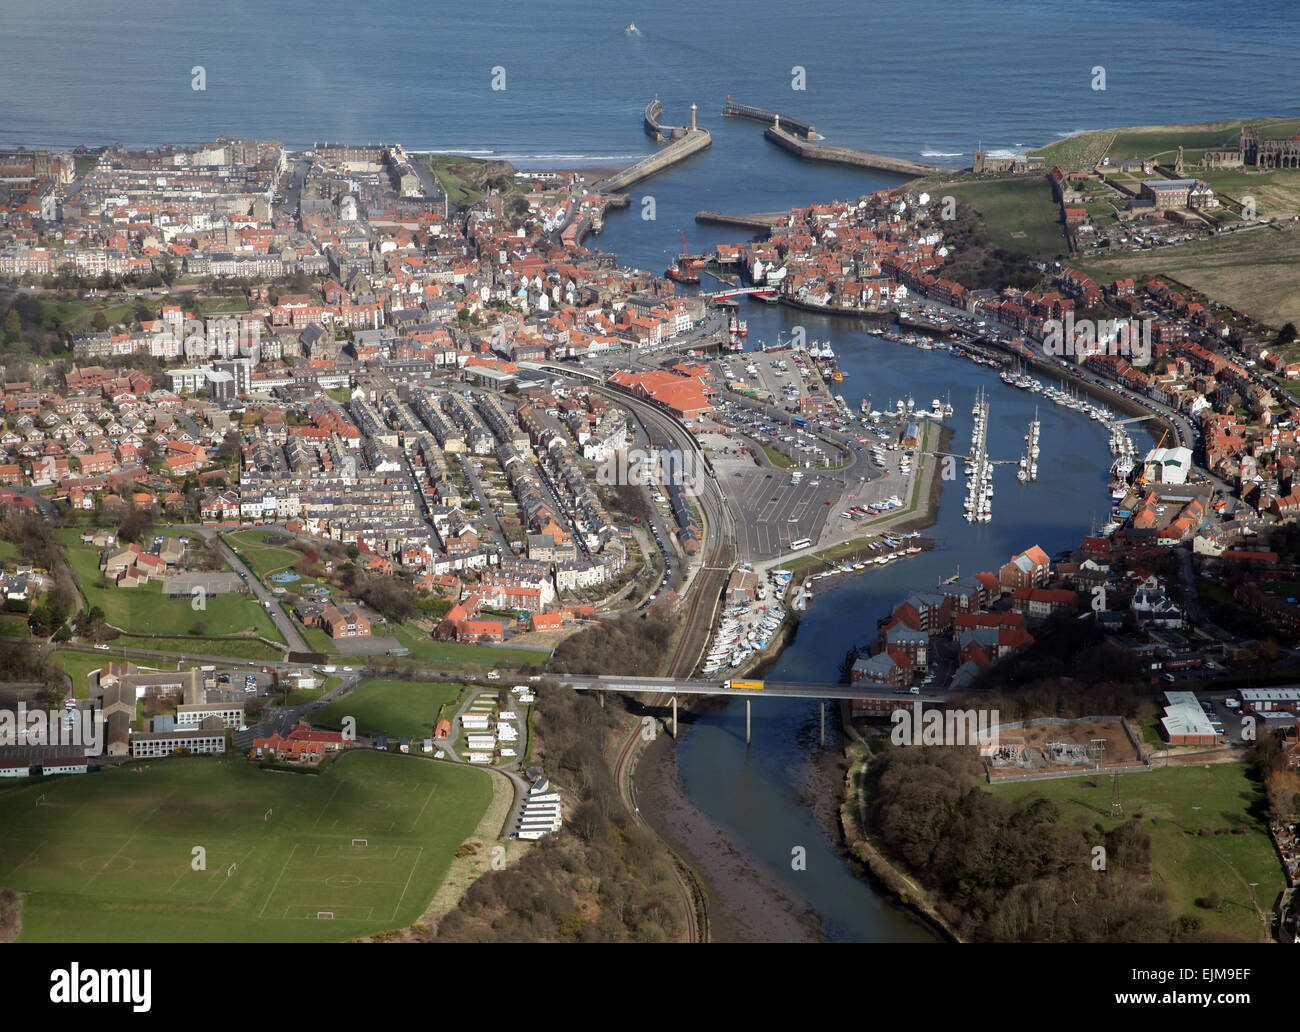 aerial view of Whitby, North Yorkshire coastal town, UK Stock Photo